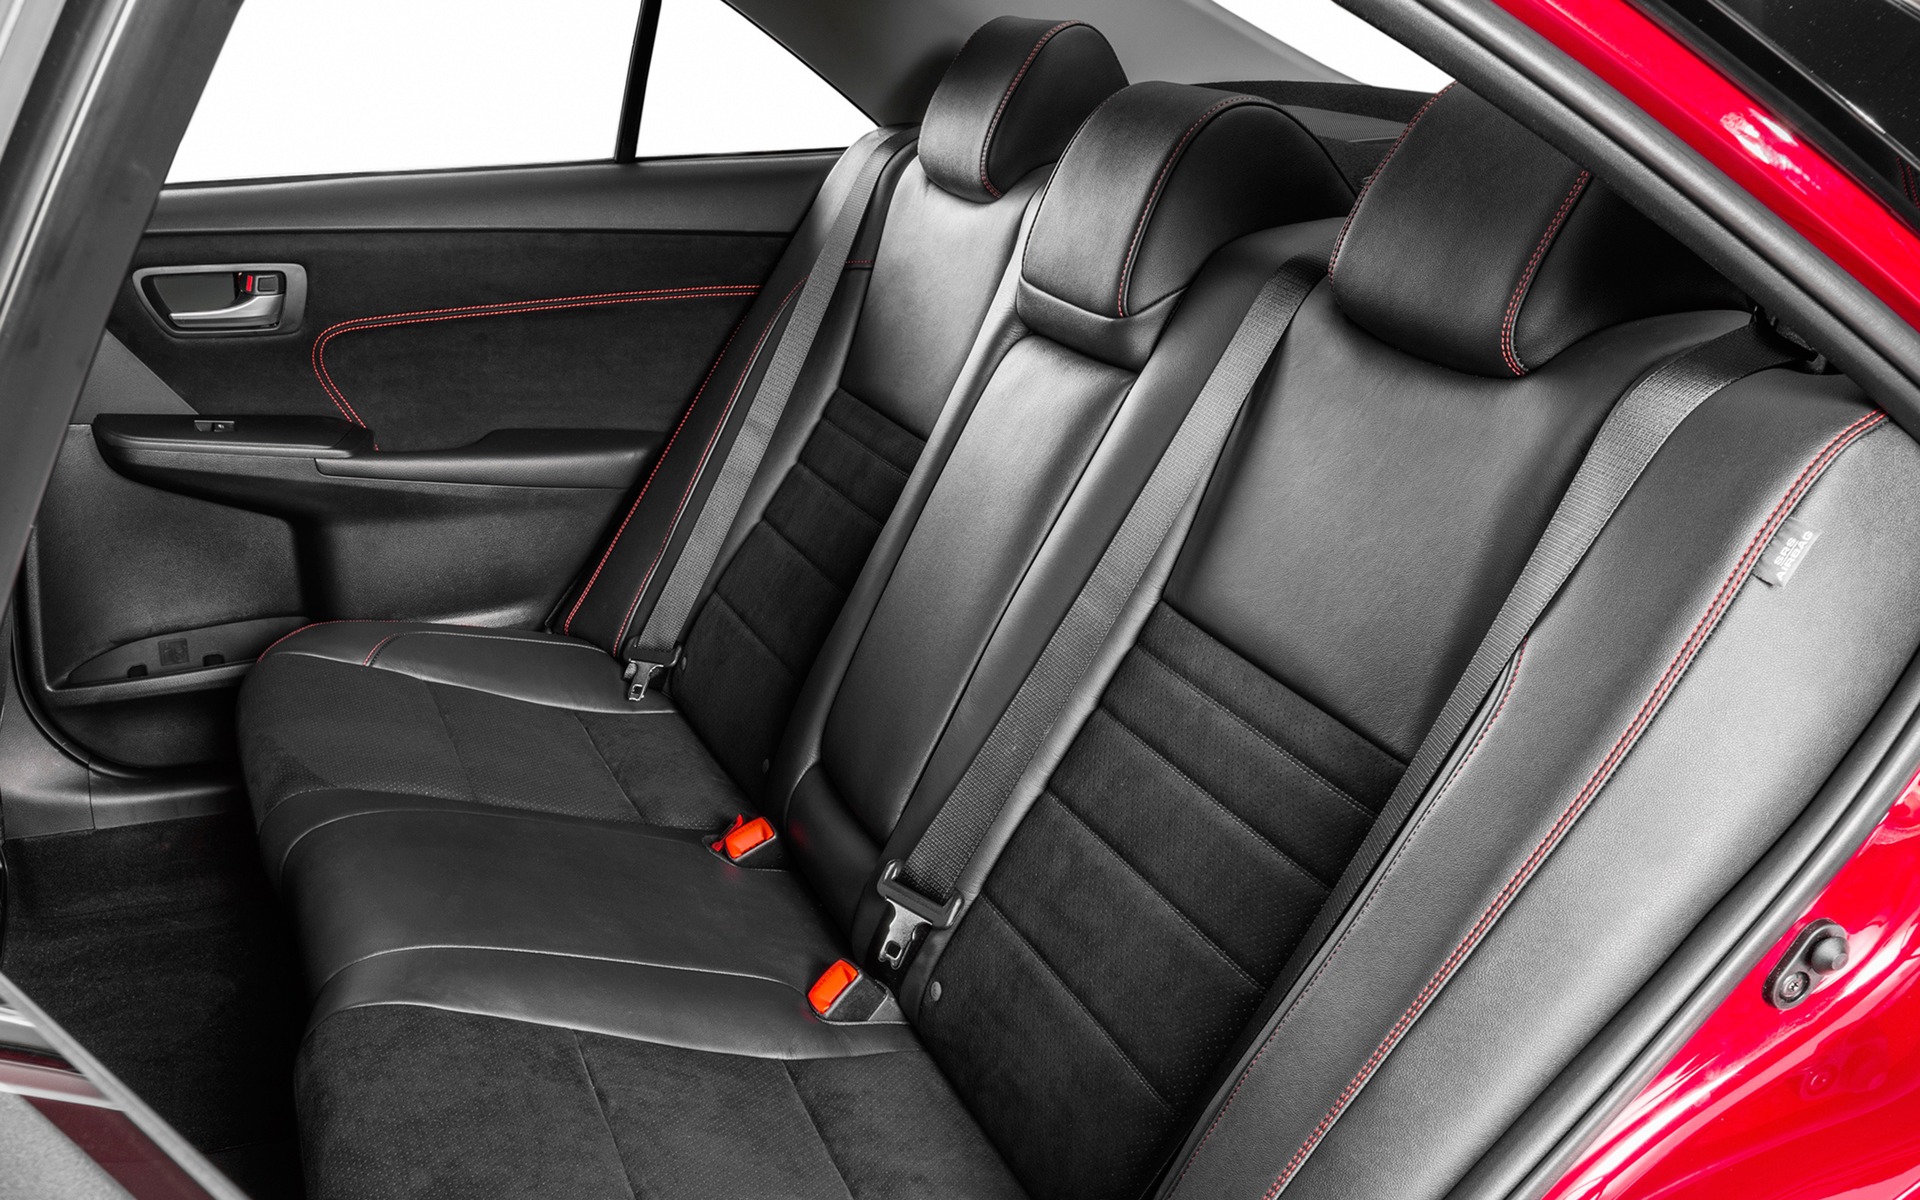 The rear seat of the car offers impressive room.